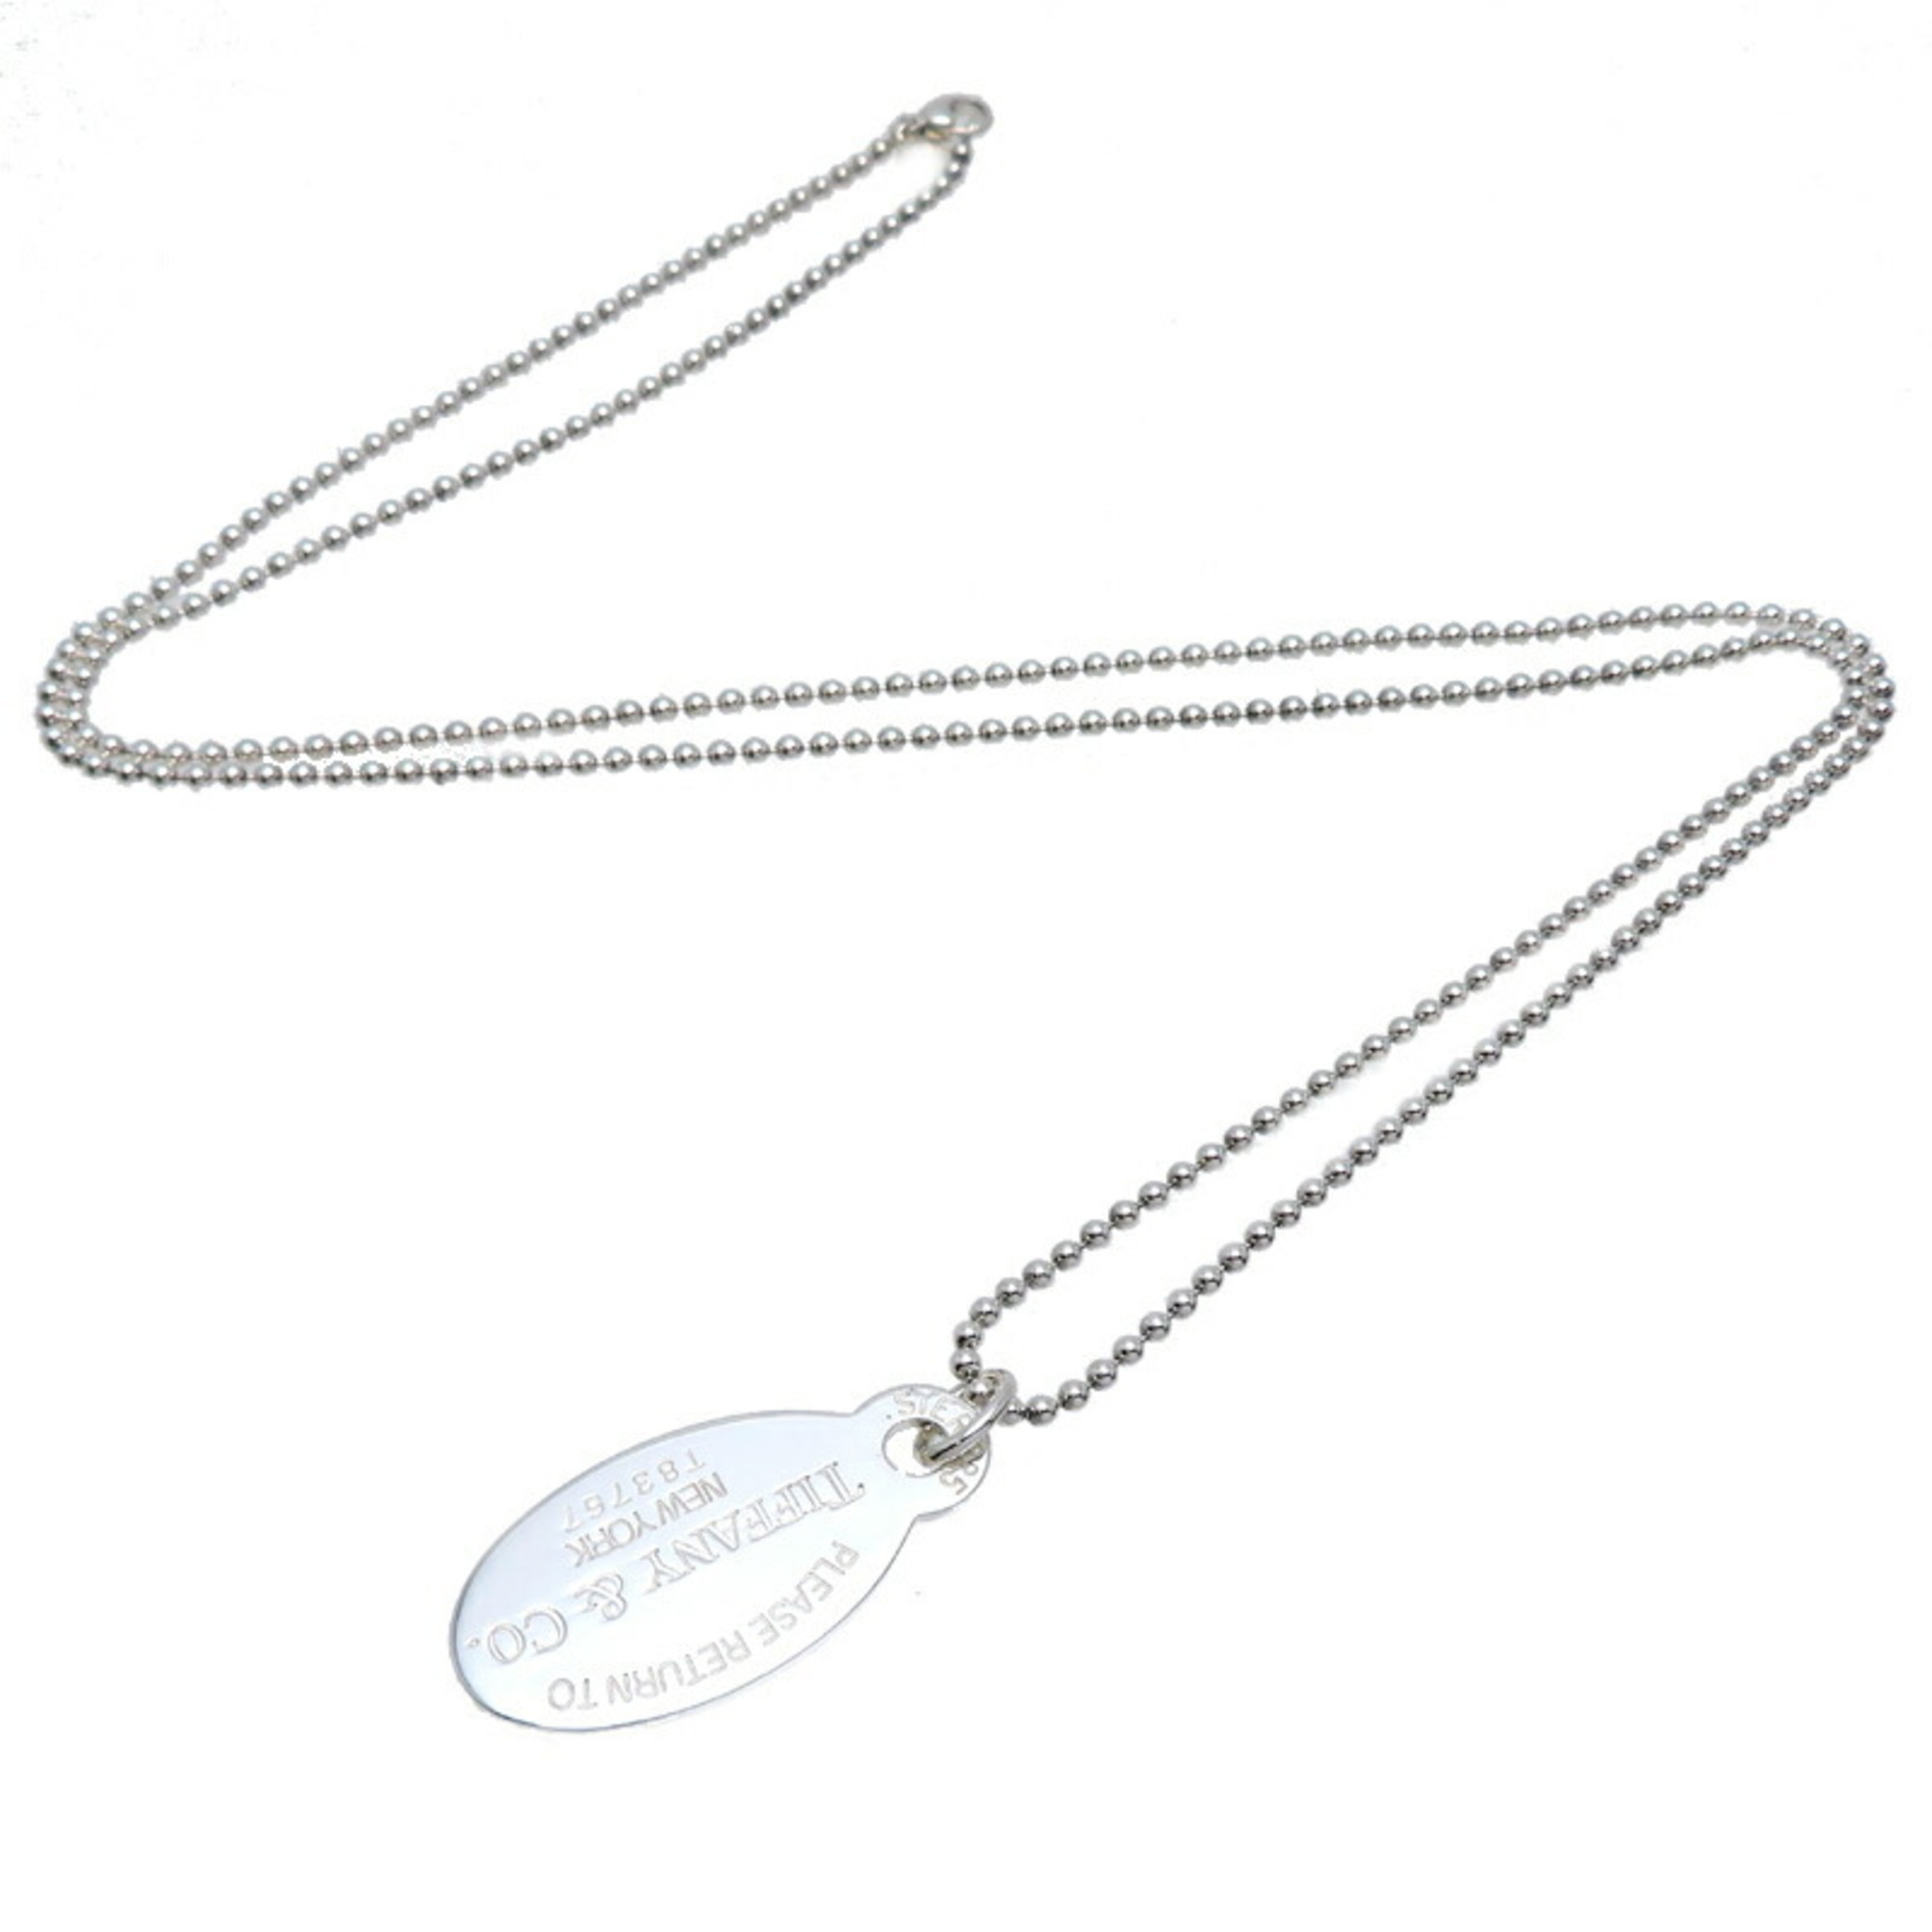 Tiffany SV925 Return to Women's Necklace Silver 925